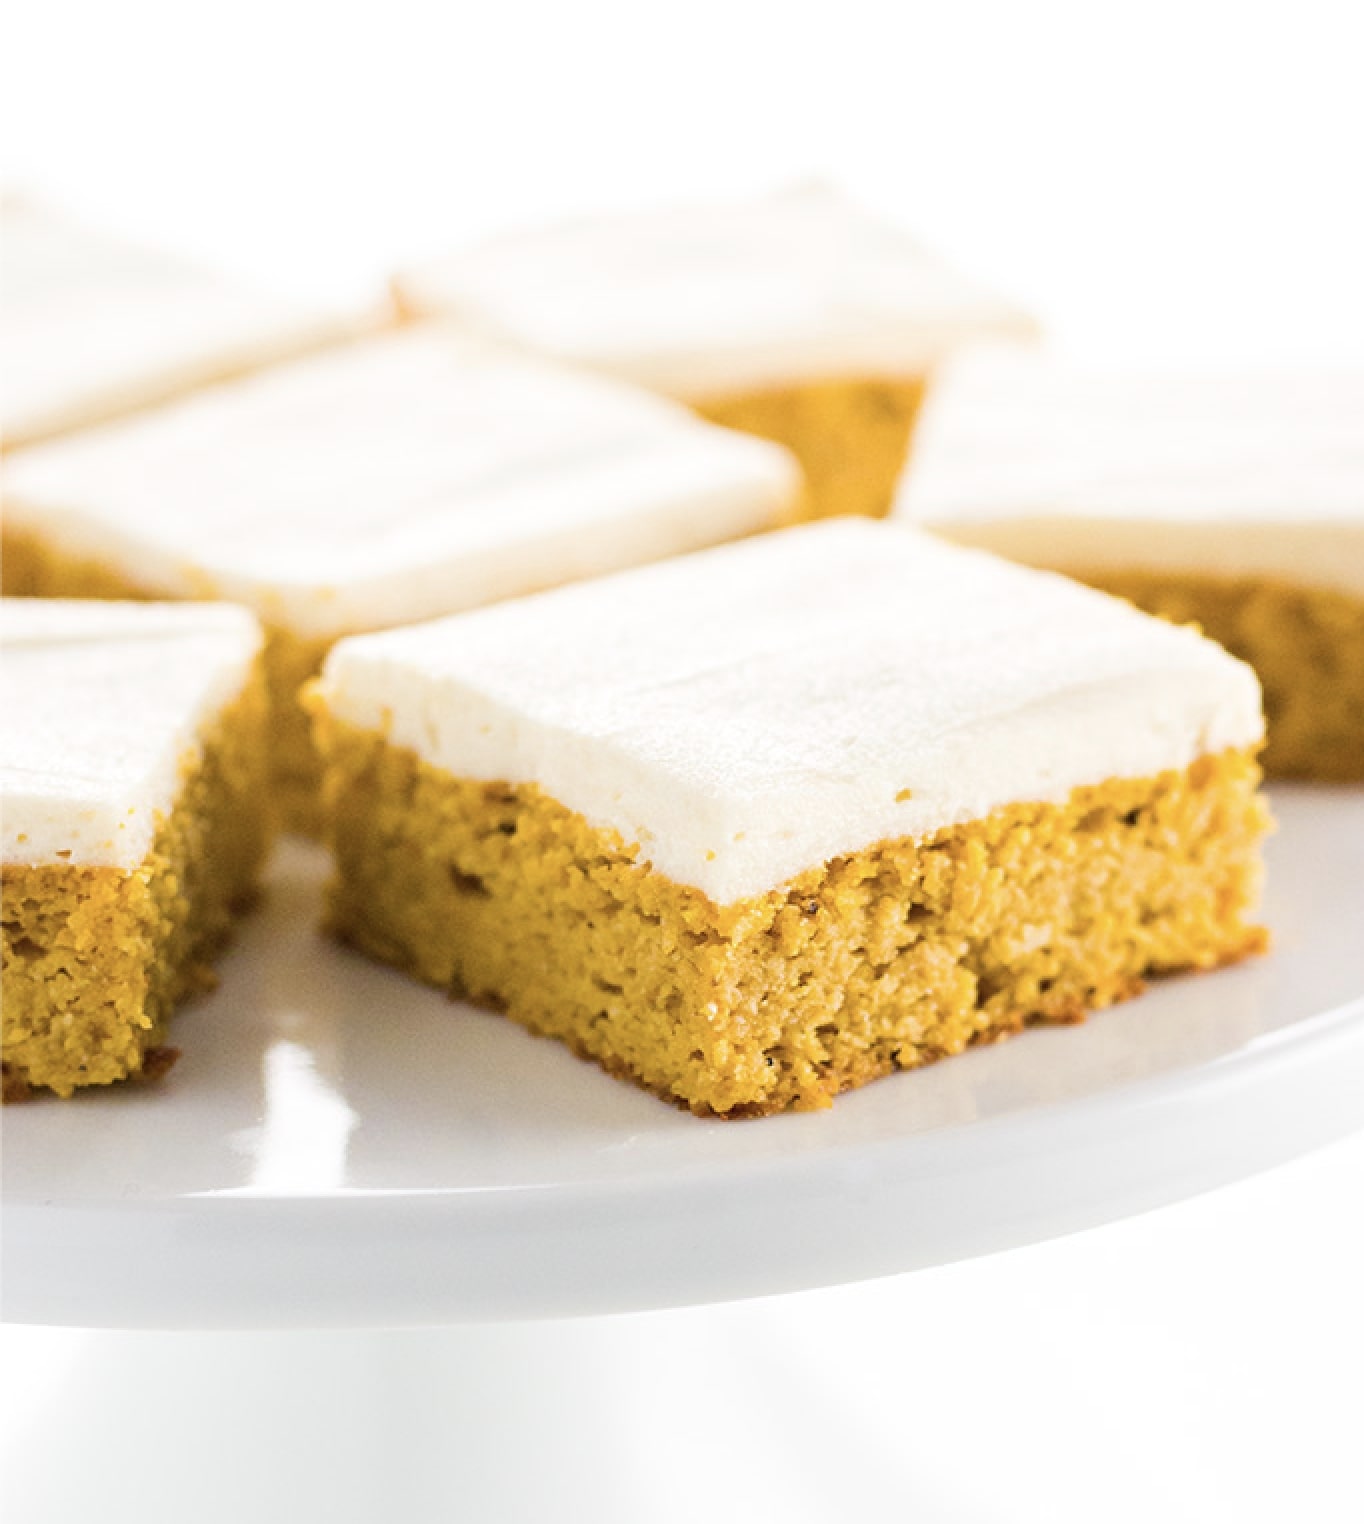 Healthy Pumpkin Bars with Cream Cheese Frosting